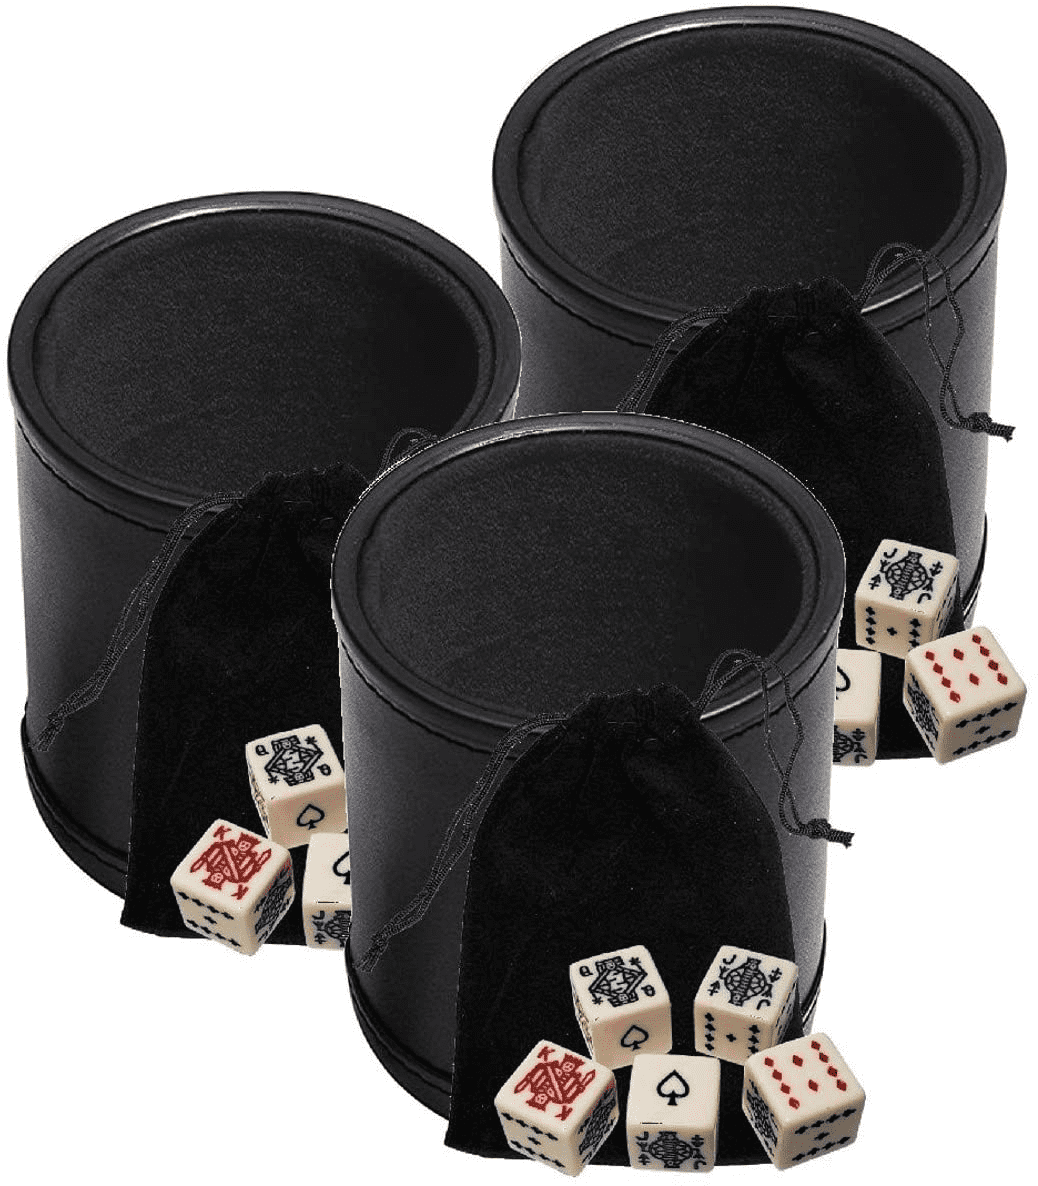 20 pack LEATHER DICE CUP POKER BAR GAMES CASINO Does not include the dice 